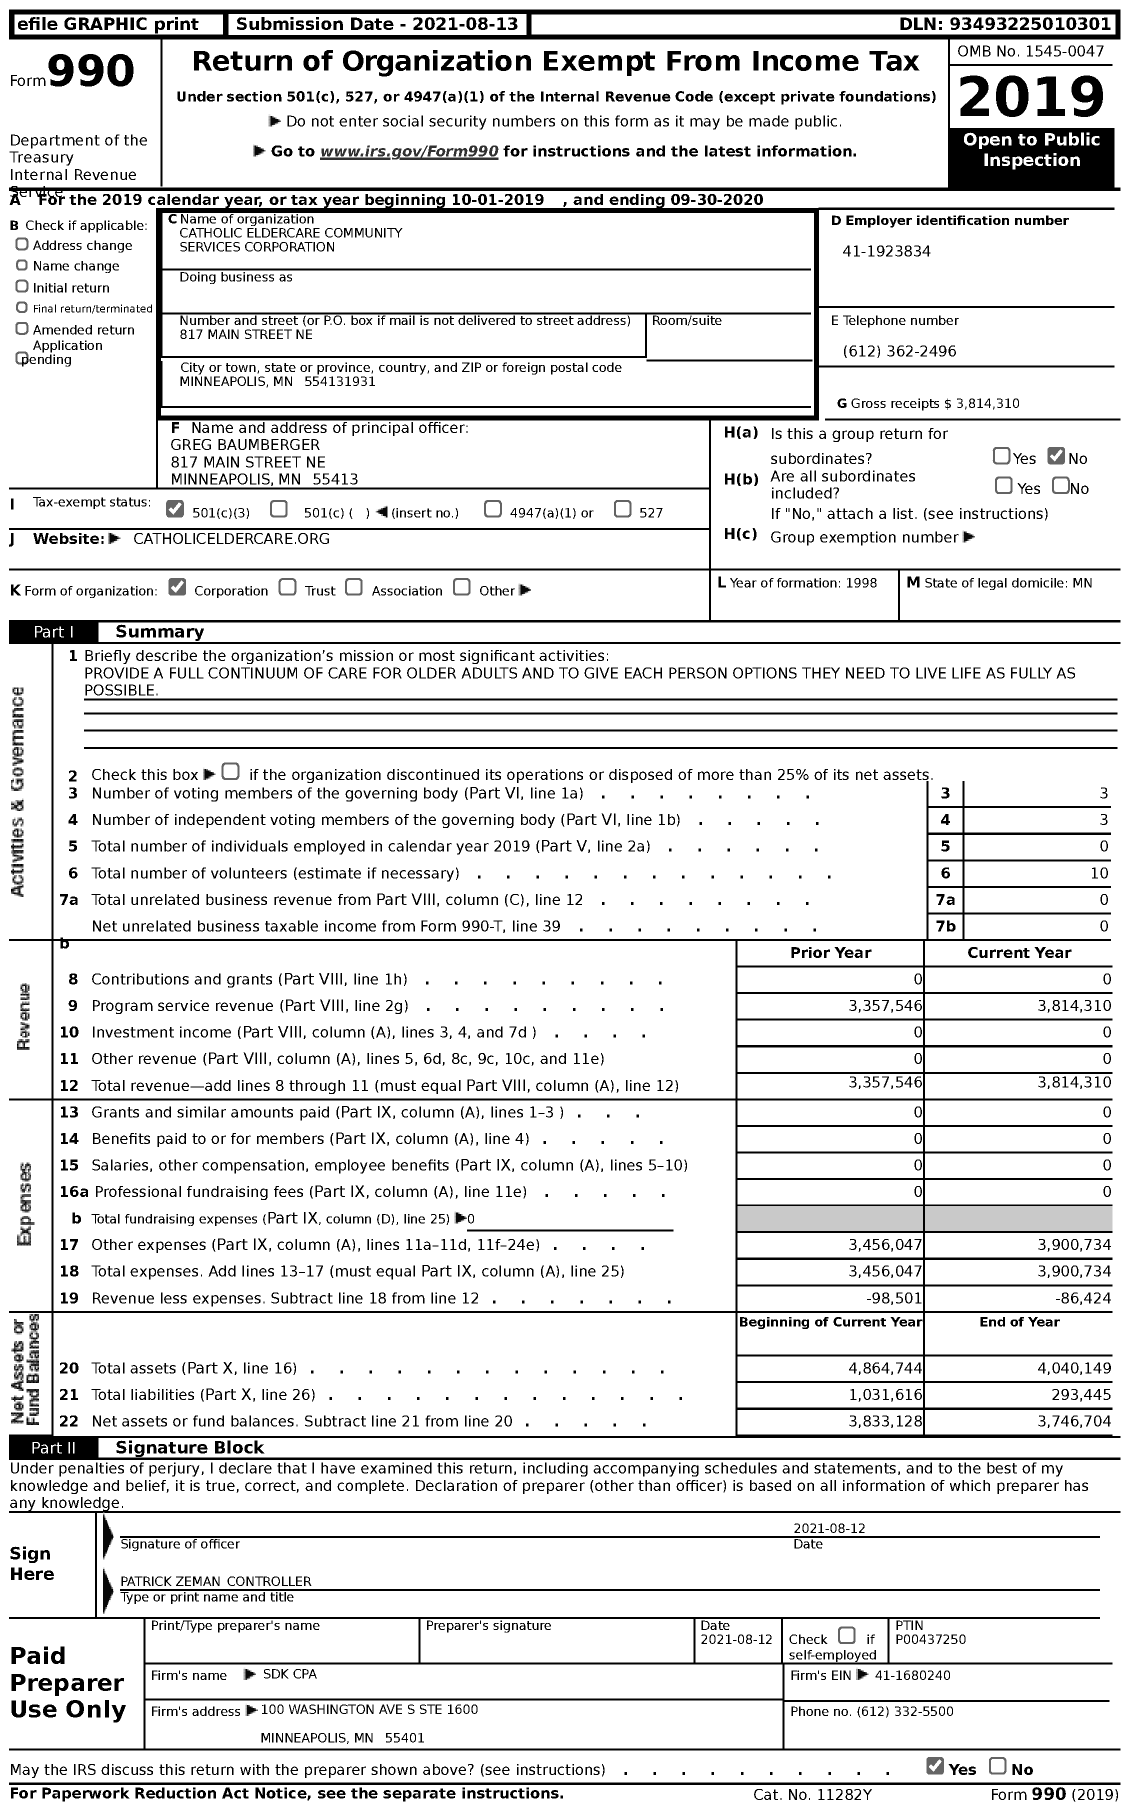 Image of first page of 2019 Form 990 for Catholic Eldercare Community Services Corporation